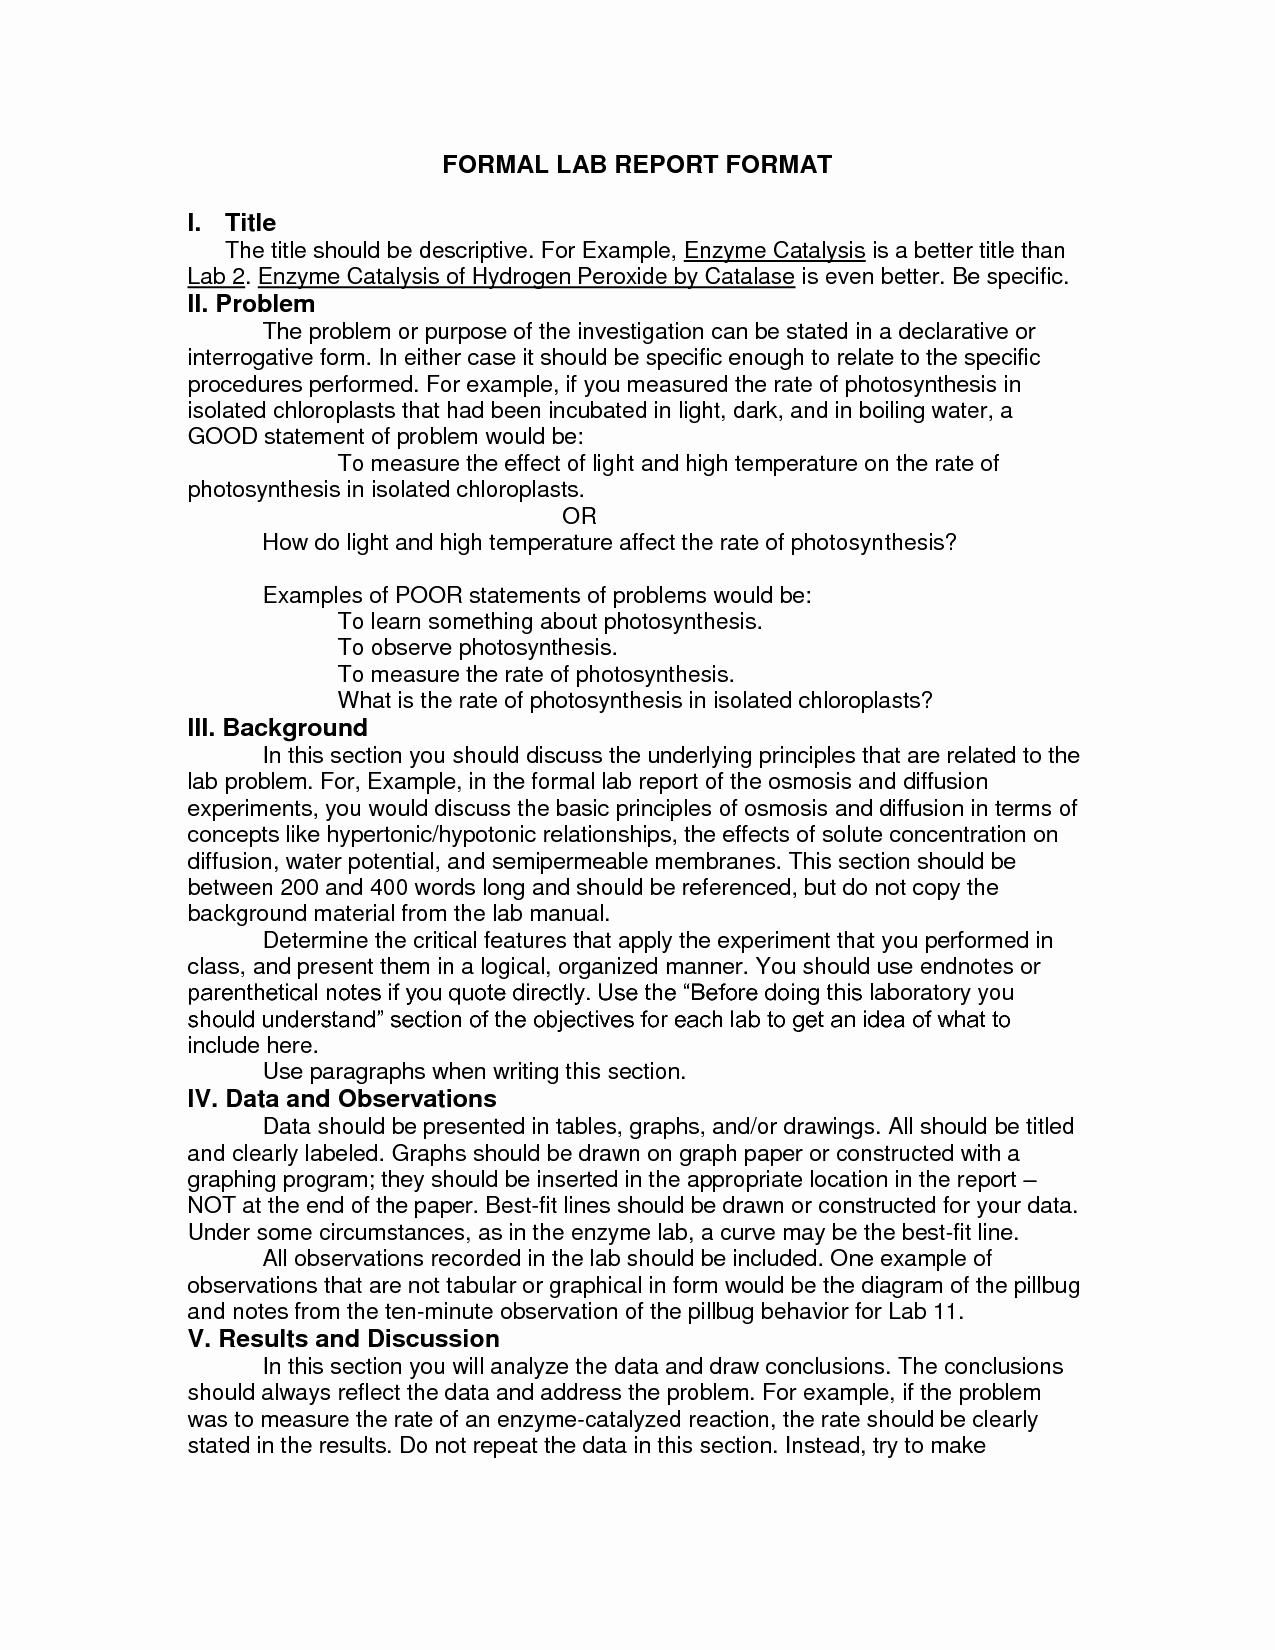 Formal Lab Report Template Elegant Another formal Lab Report format